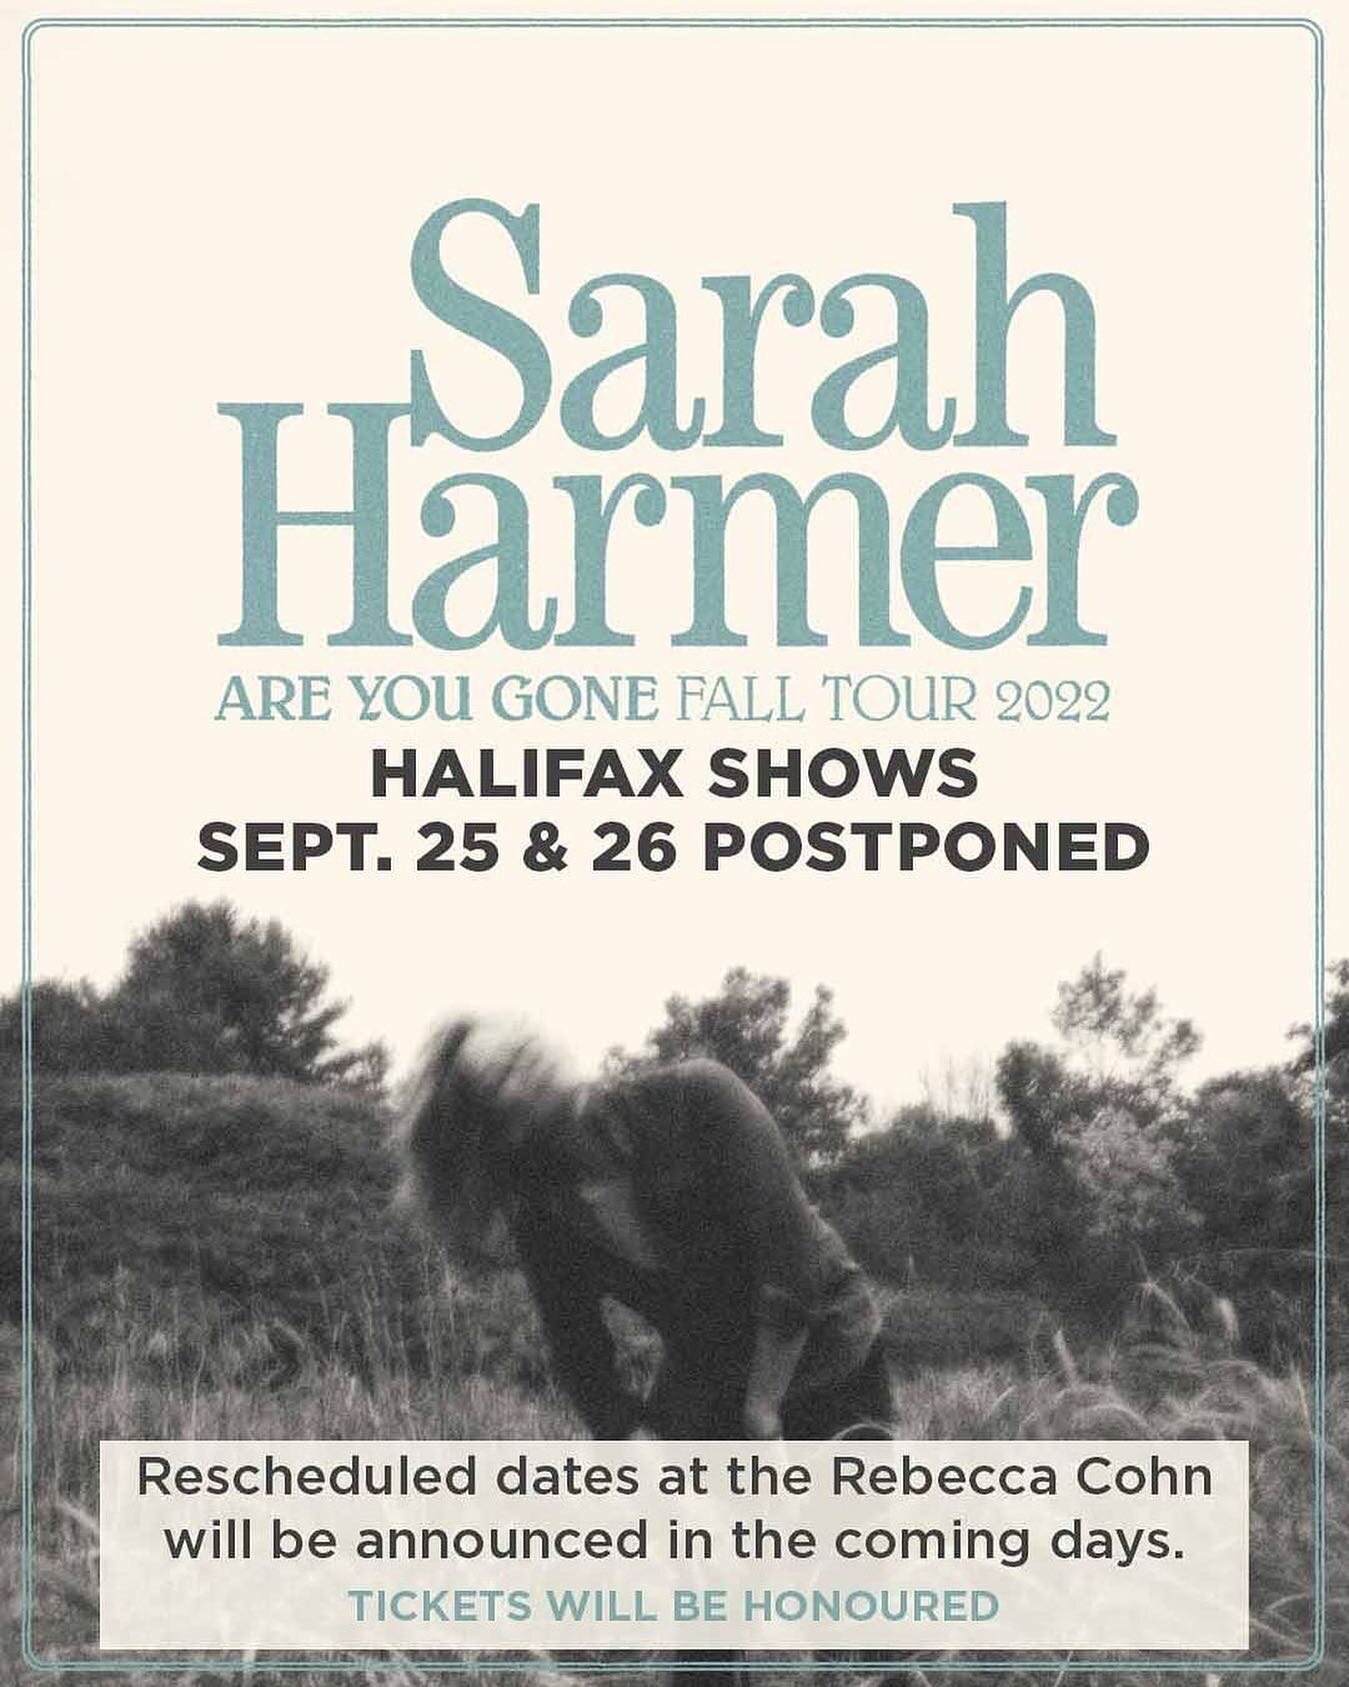 IMPORTANT UPDATE 🚨:

Sadly, due to the impacts of Hurricane Fiona causing lack of power at the venue, and in the interest of keeping everyone safe, Sarah Harmer (@yoharmer) shows at the Rebecca Cohn Auditorium (@dalartscentre) in Halifax tonight (Se